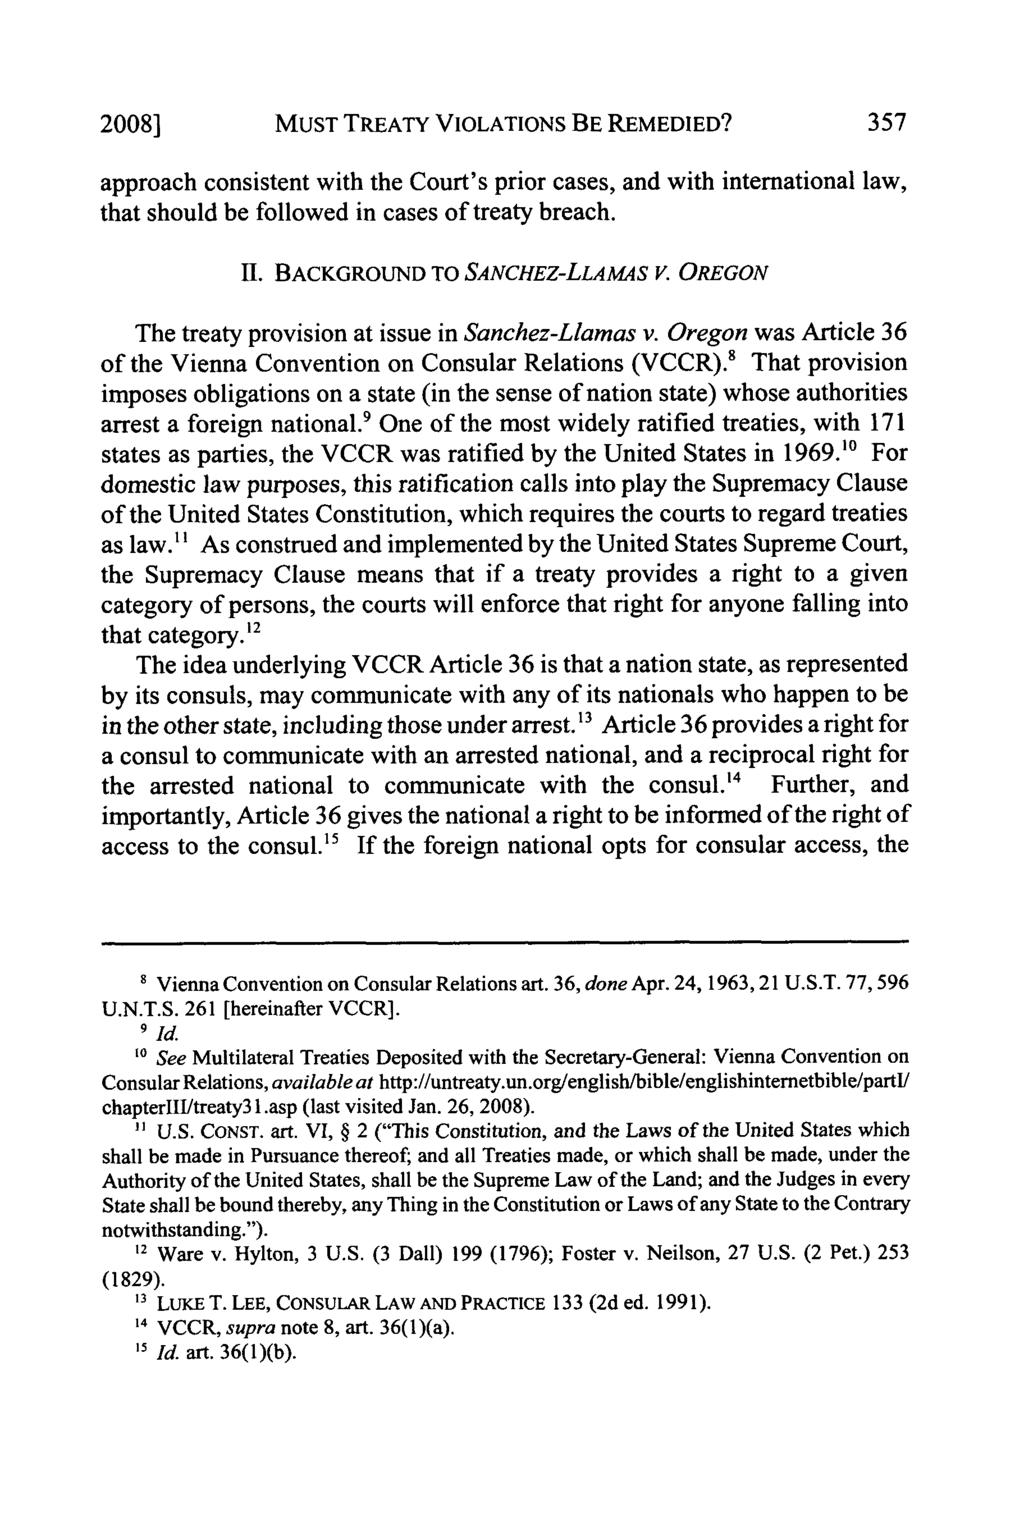 2008] MUST TREATY VIOLATIONS BE REMEDIED? approach consistent with the Court's prior cases, and with international law, that should be followed in cases of treaty breach. II.